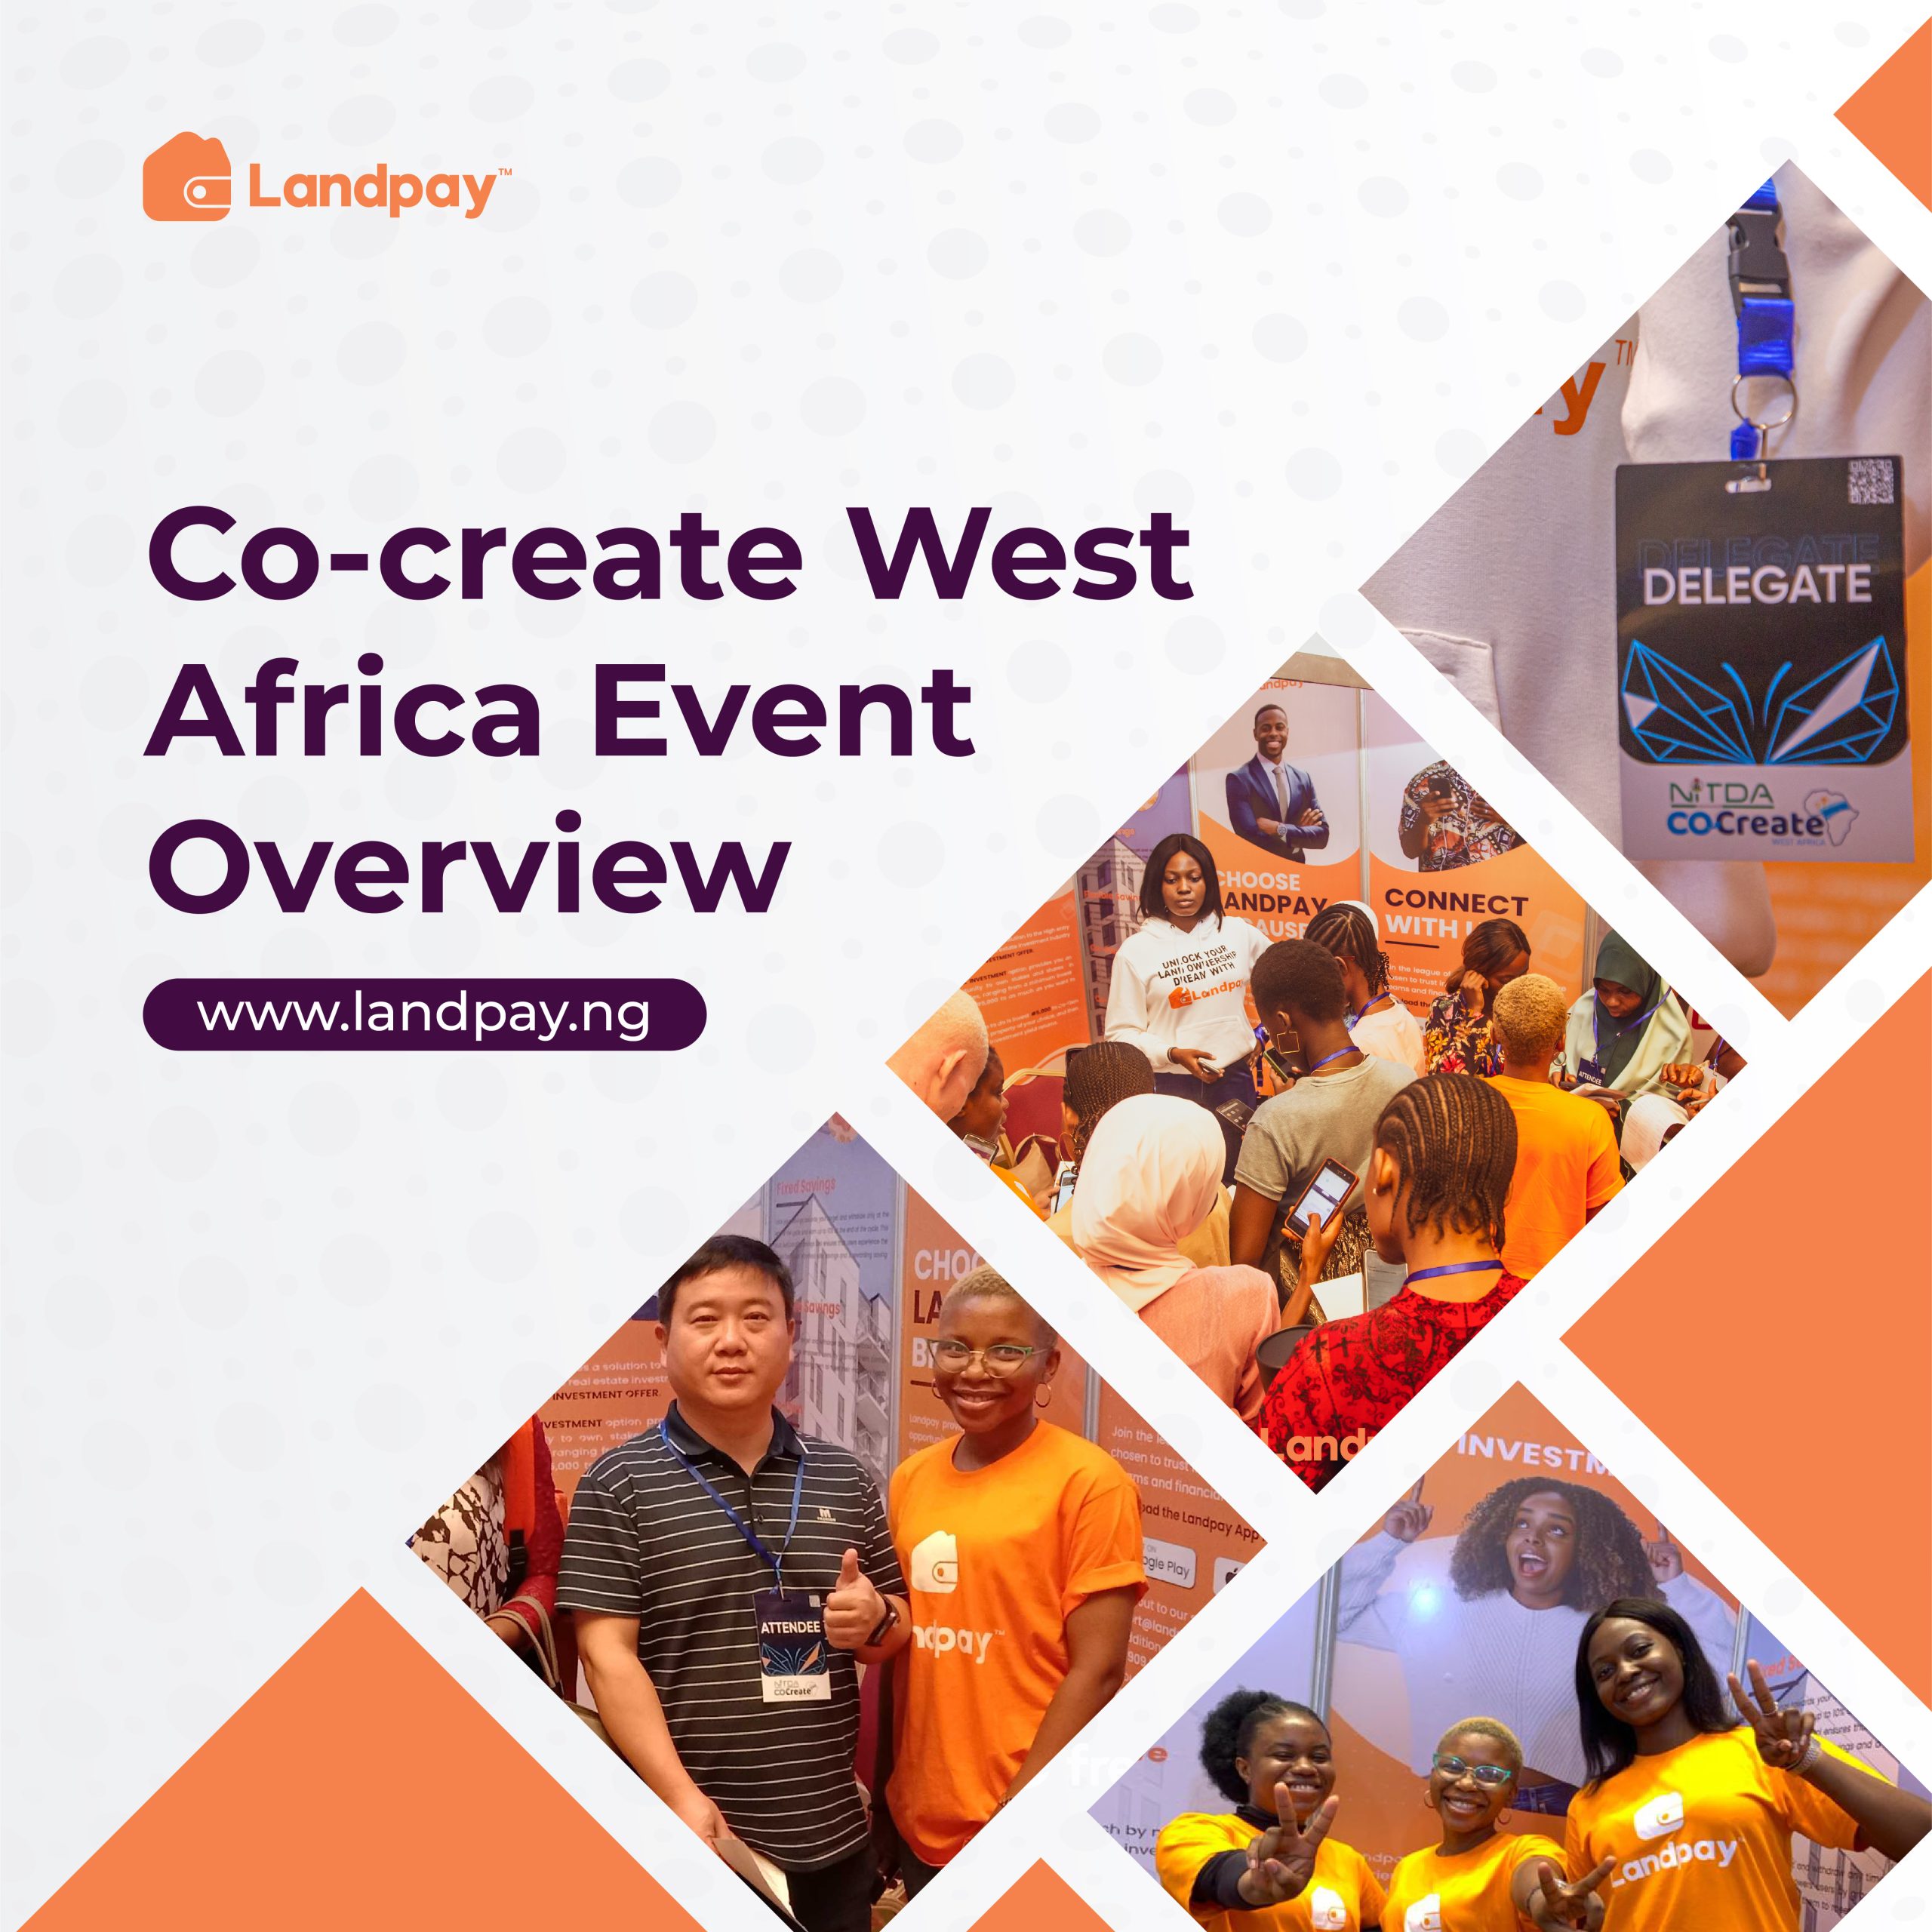 CO-CREATE WEST AFRICA EVENT OVERVIEW